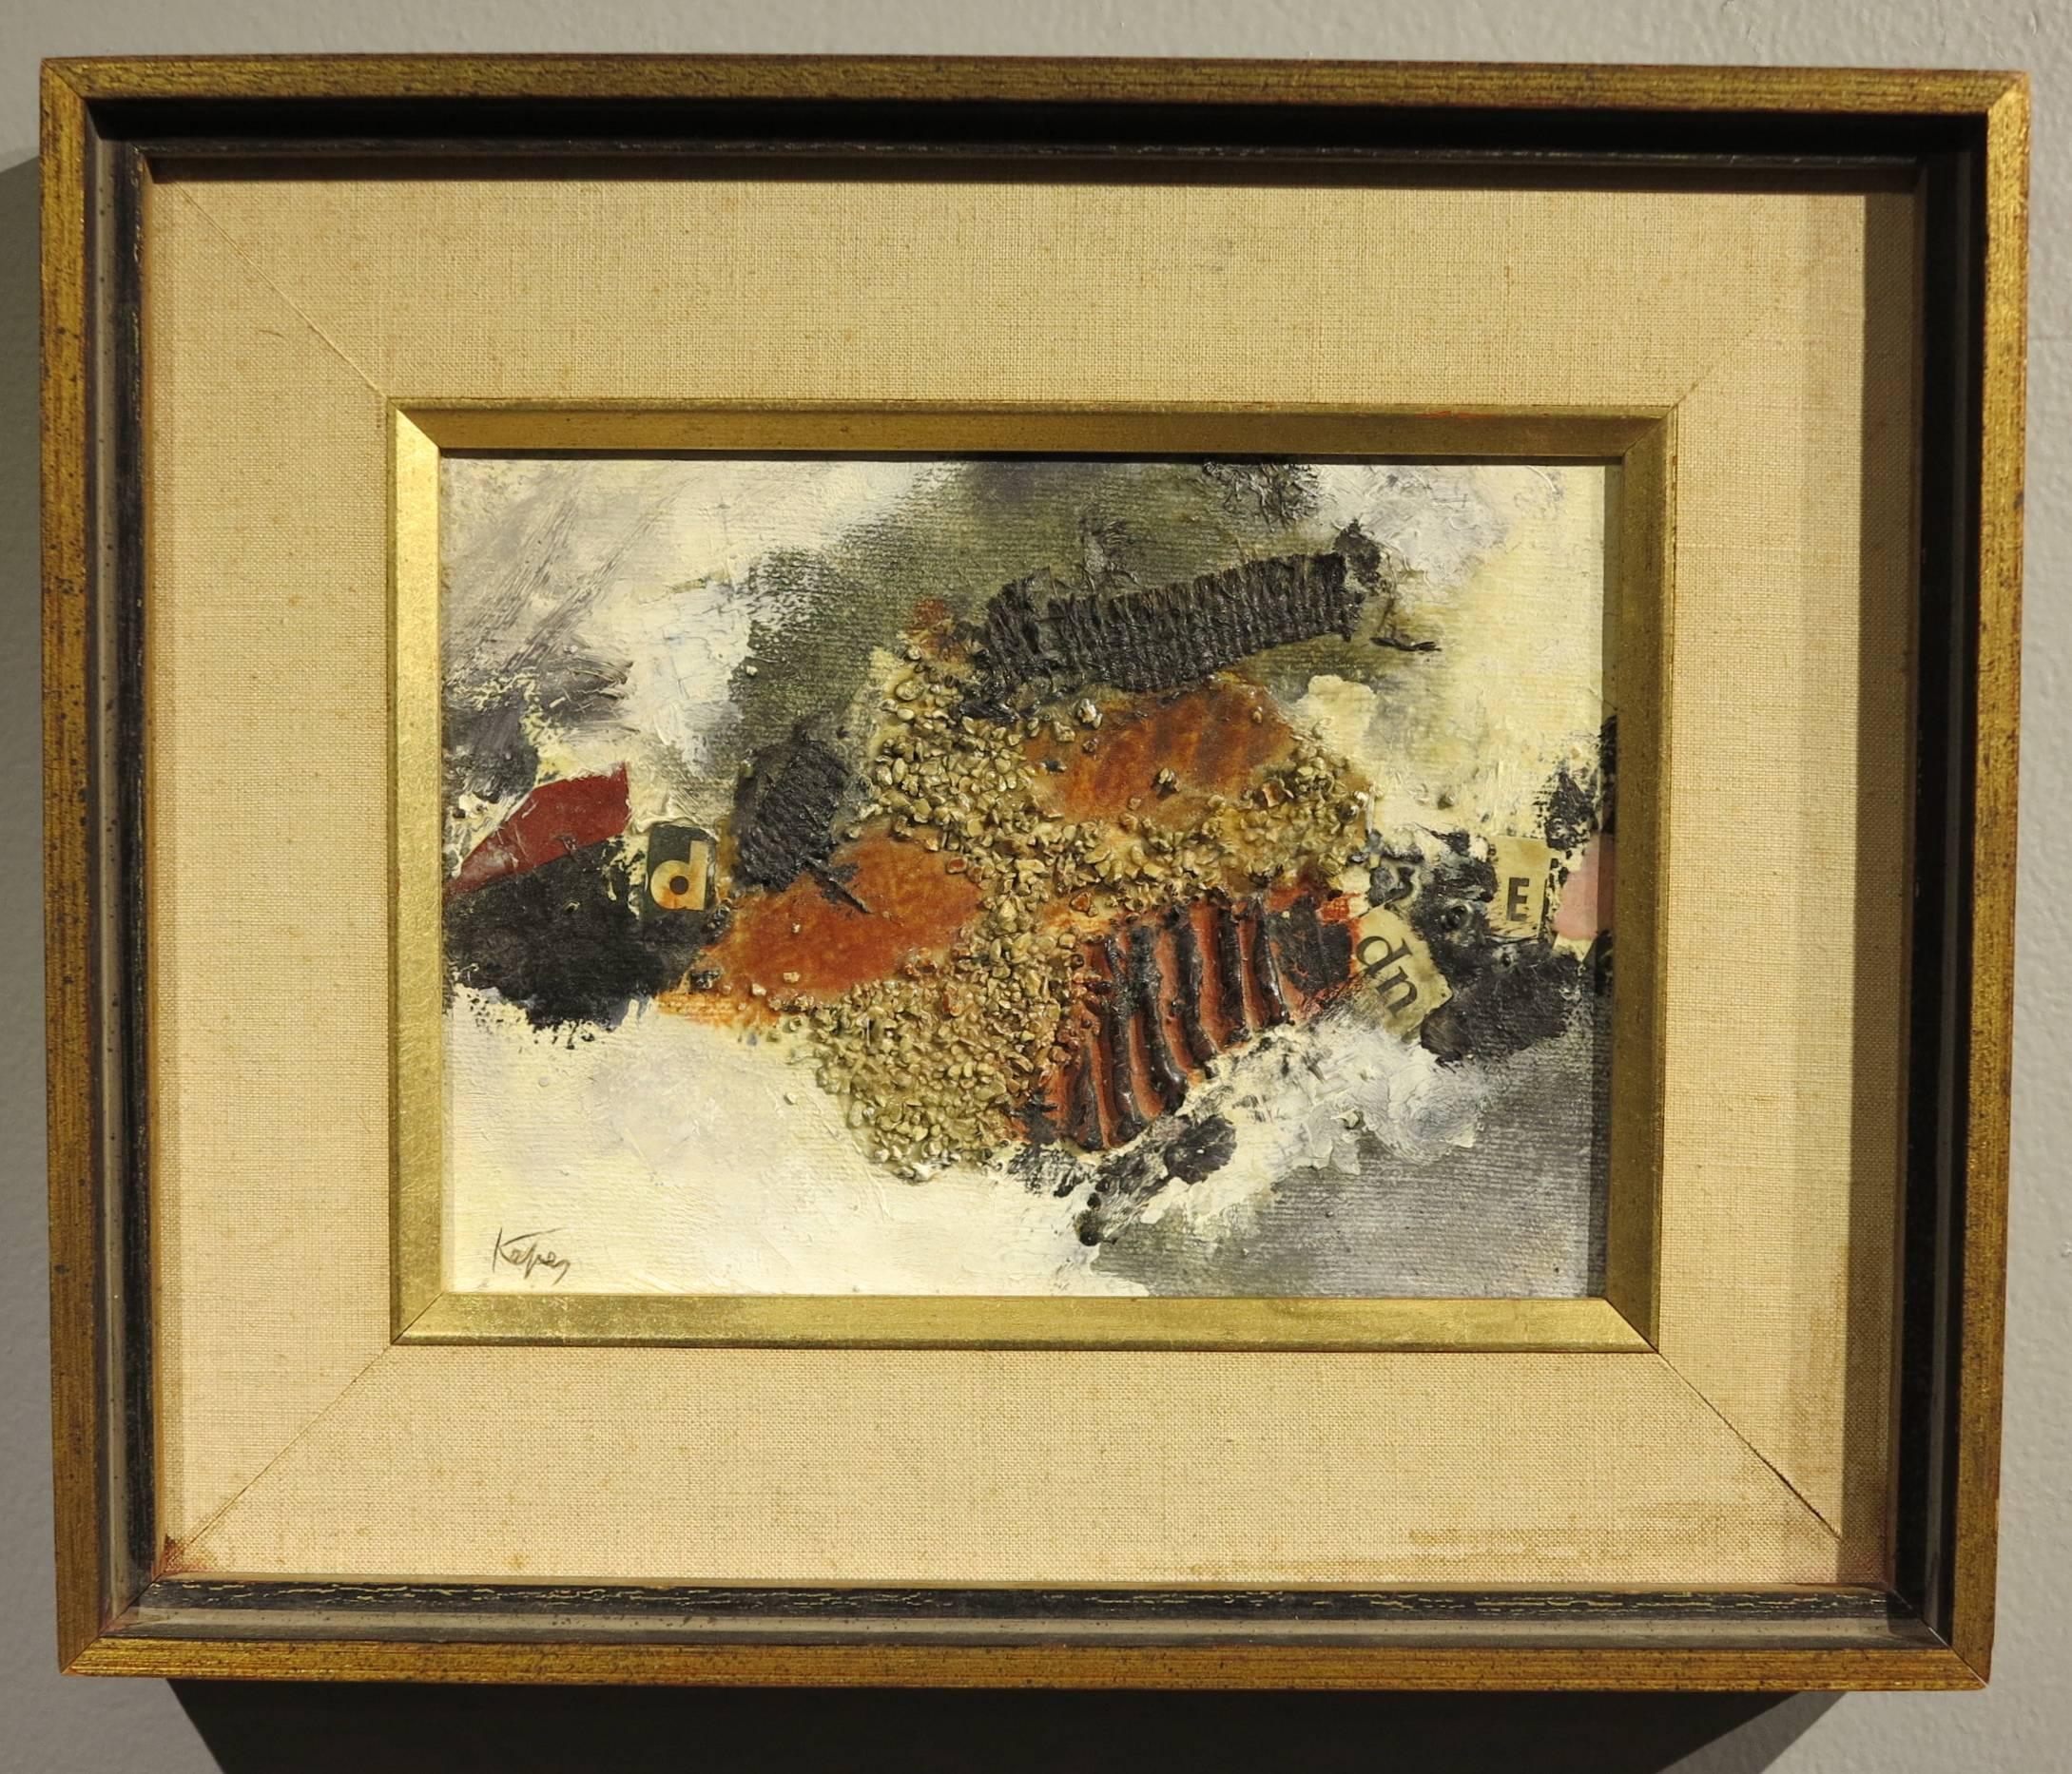 Gyorgy Kepes (1906-2001). Oil, sand and collage on canvas measures 6 x 8 inches; 10 x 12 inches framed. Painting is in excellent condition with no damage or restoration. Signed lower left. Frame has minor water stain on linen, lower right. 

Kepes